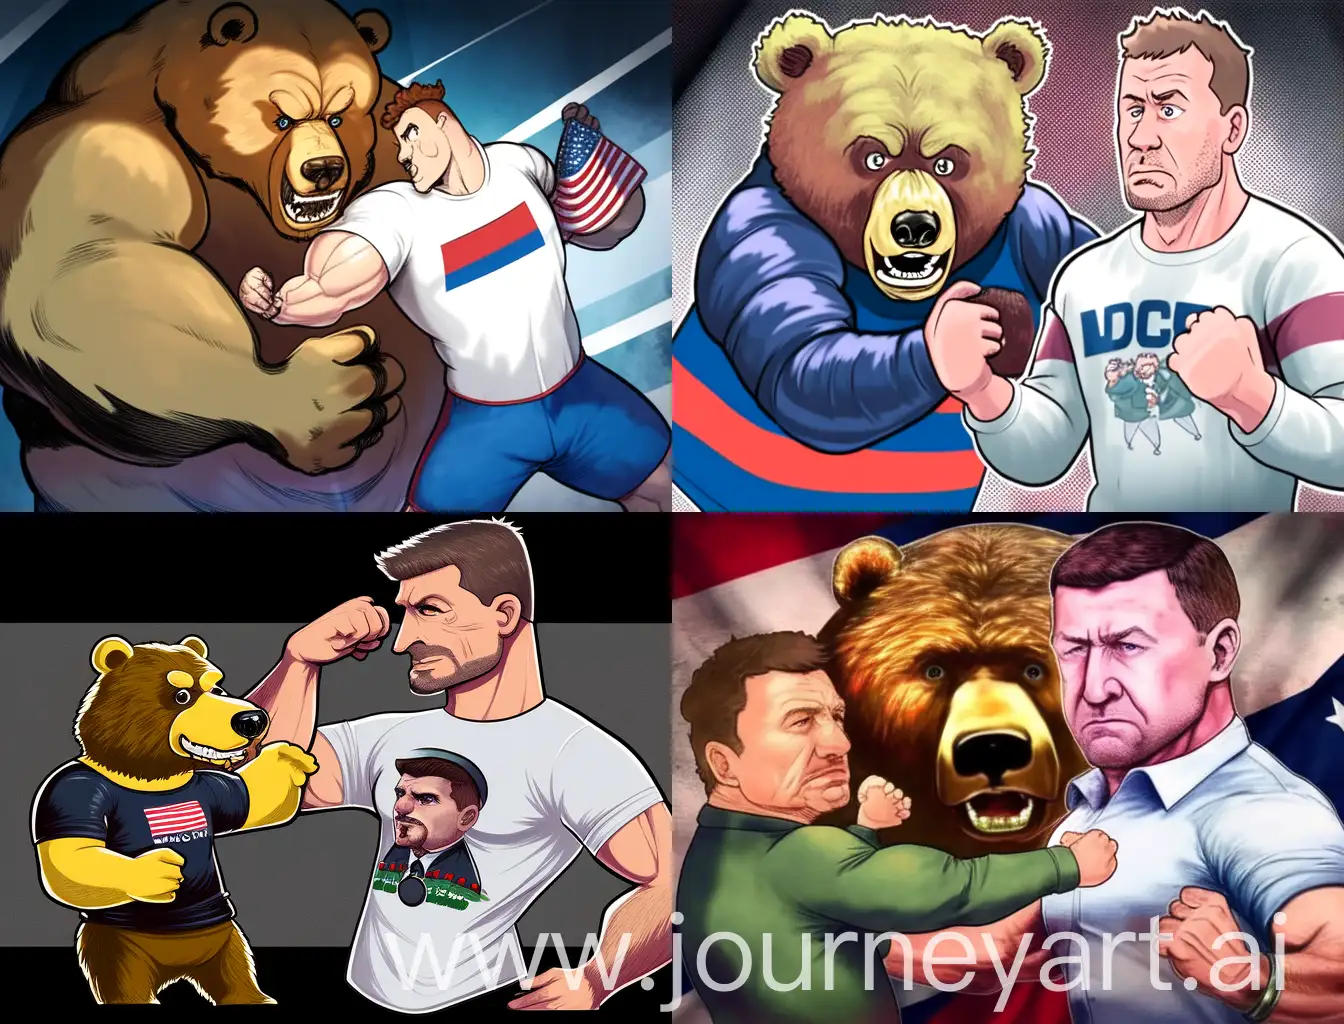 Caricature of a Russian bear wrestling with Volodymyr Zelenskyy. Instead of Volodymyr Zelenskyy's hands, USA  hands come out of Volodymyr Zelenskyy's shirt sleeve.